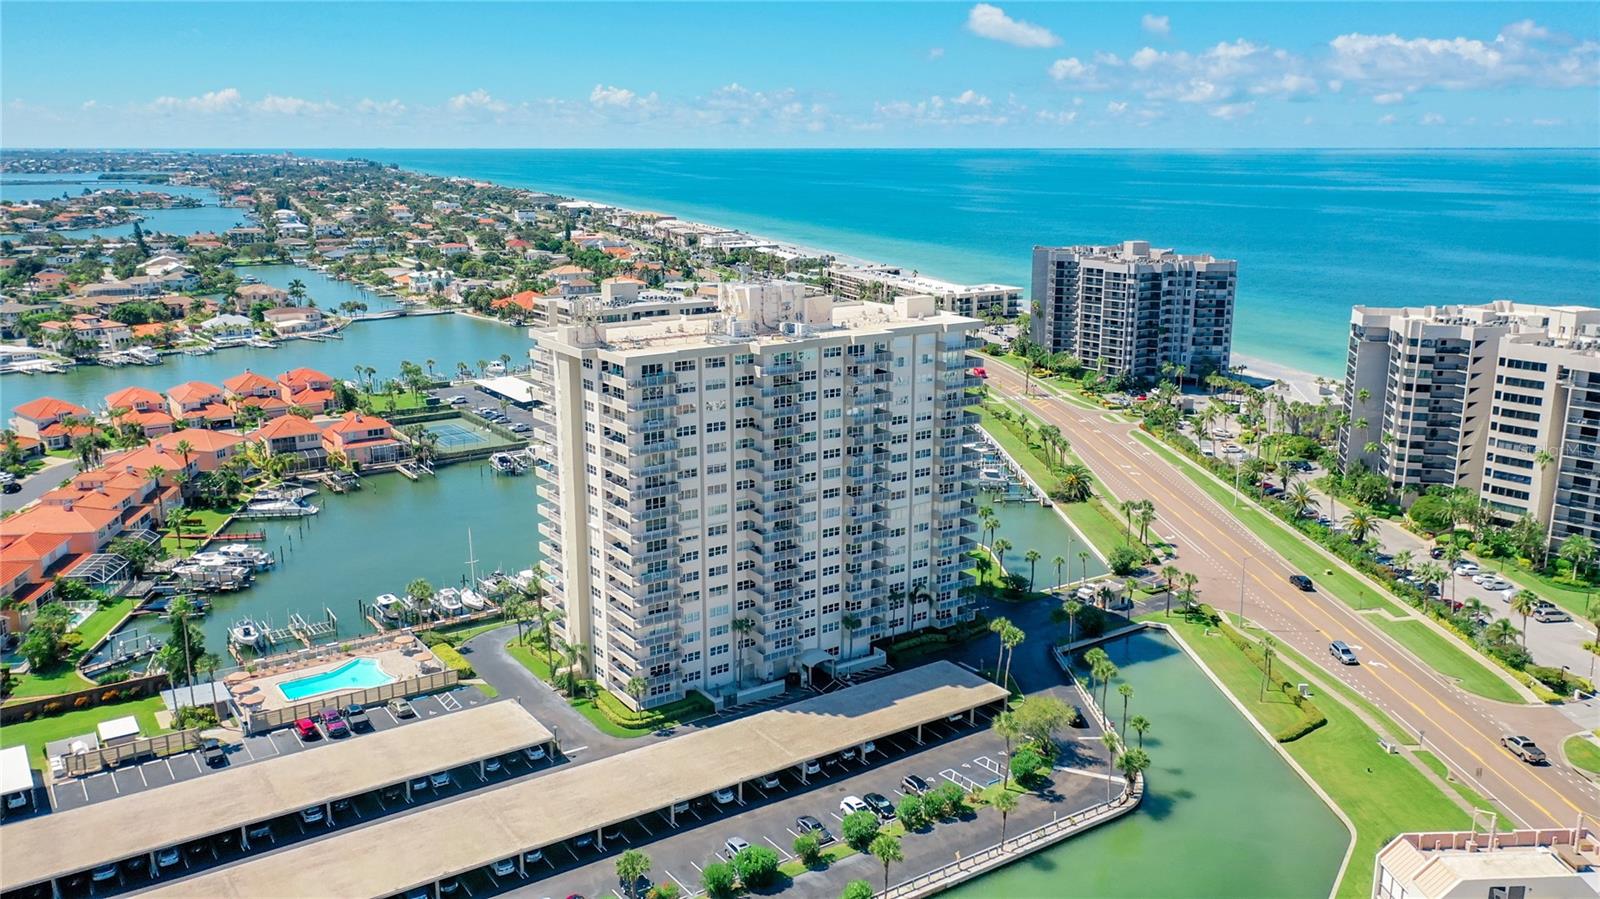 For sale: 1621 GULF BOULEVARD # 506, CLEARWATER FL 33767, CLEARWATER, FL